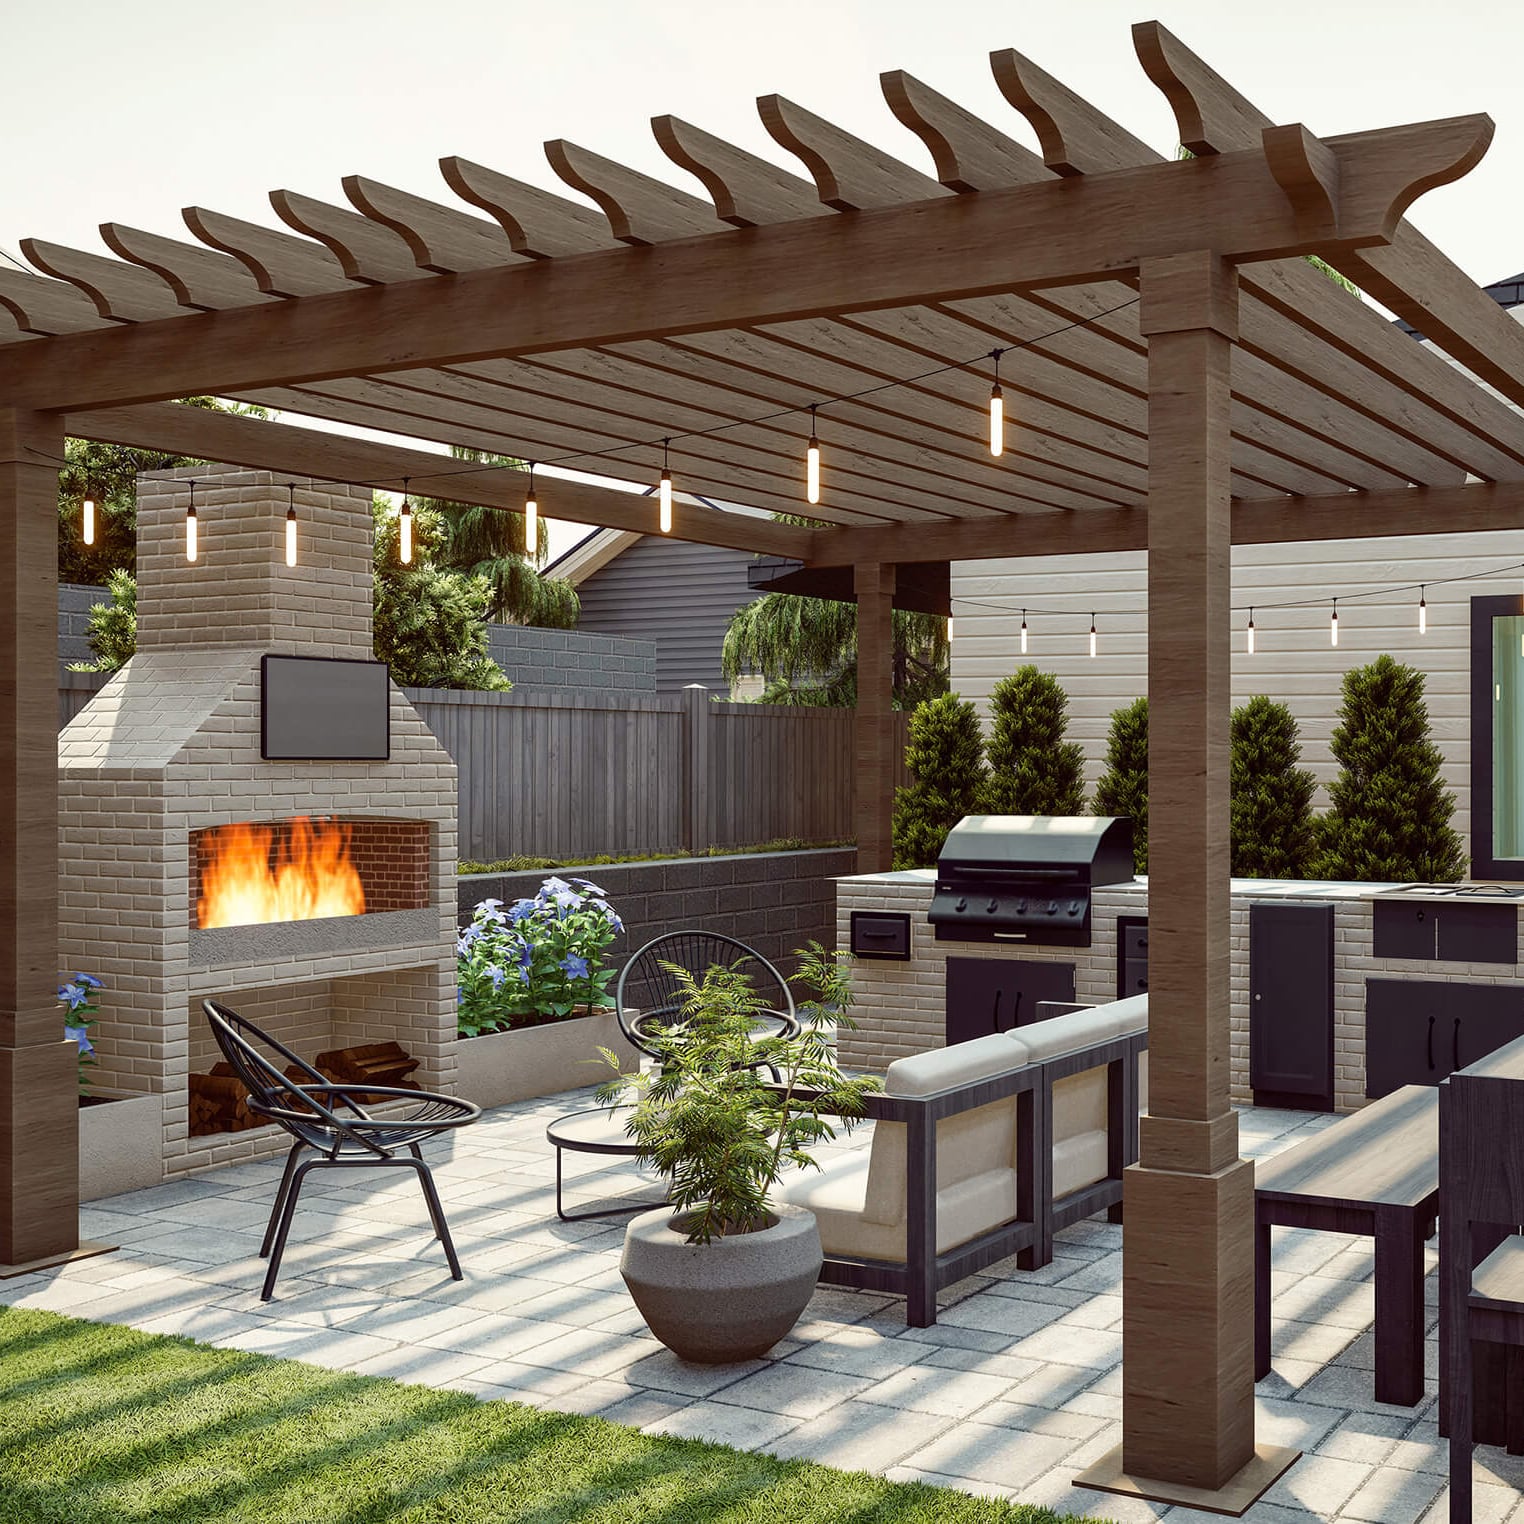 Inviting backyard patio with a pergola, outdoor kitchen, brick fireplace, and comfortable seating, illuminated by string lights.